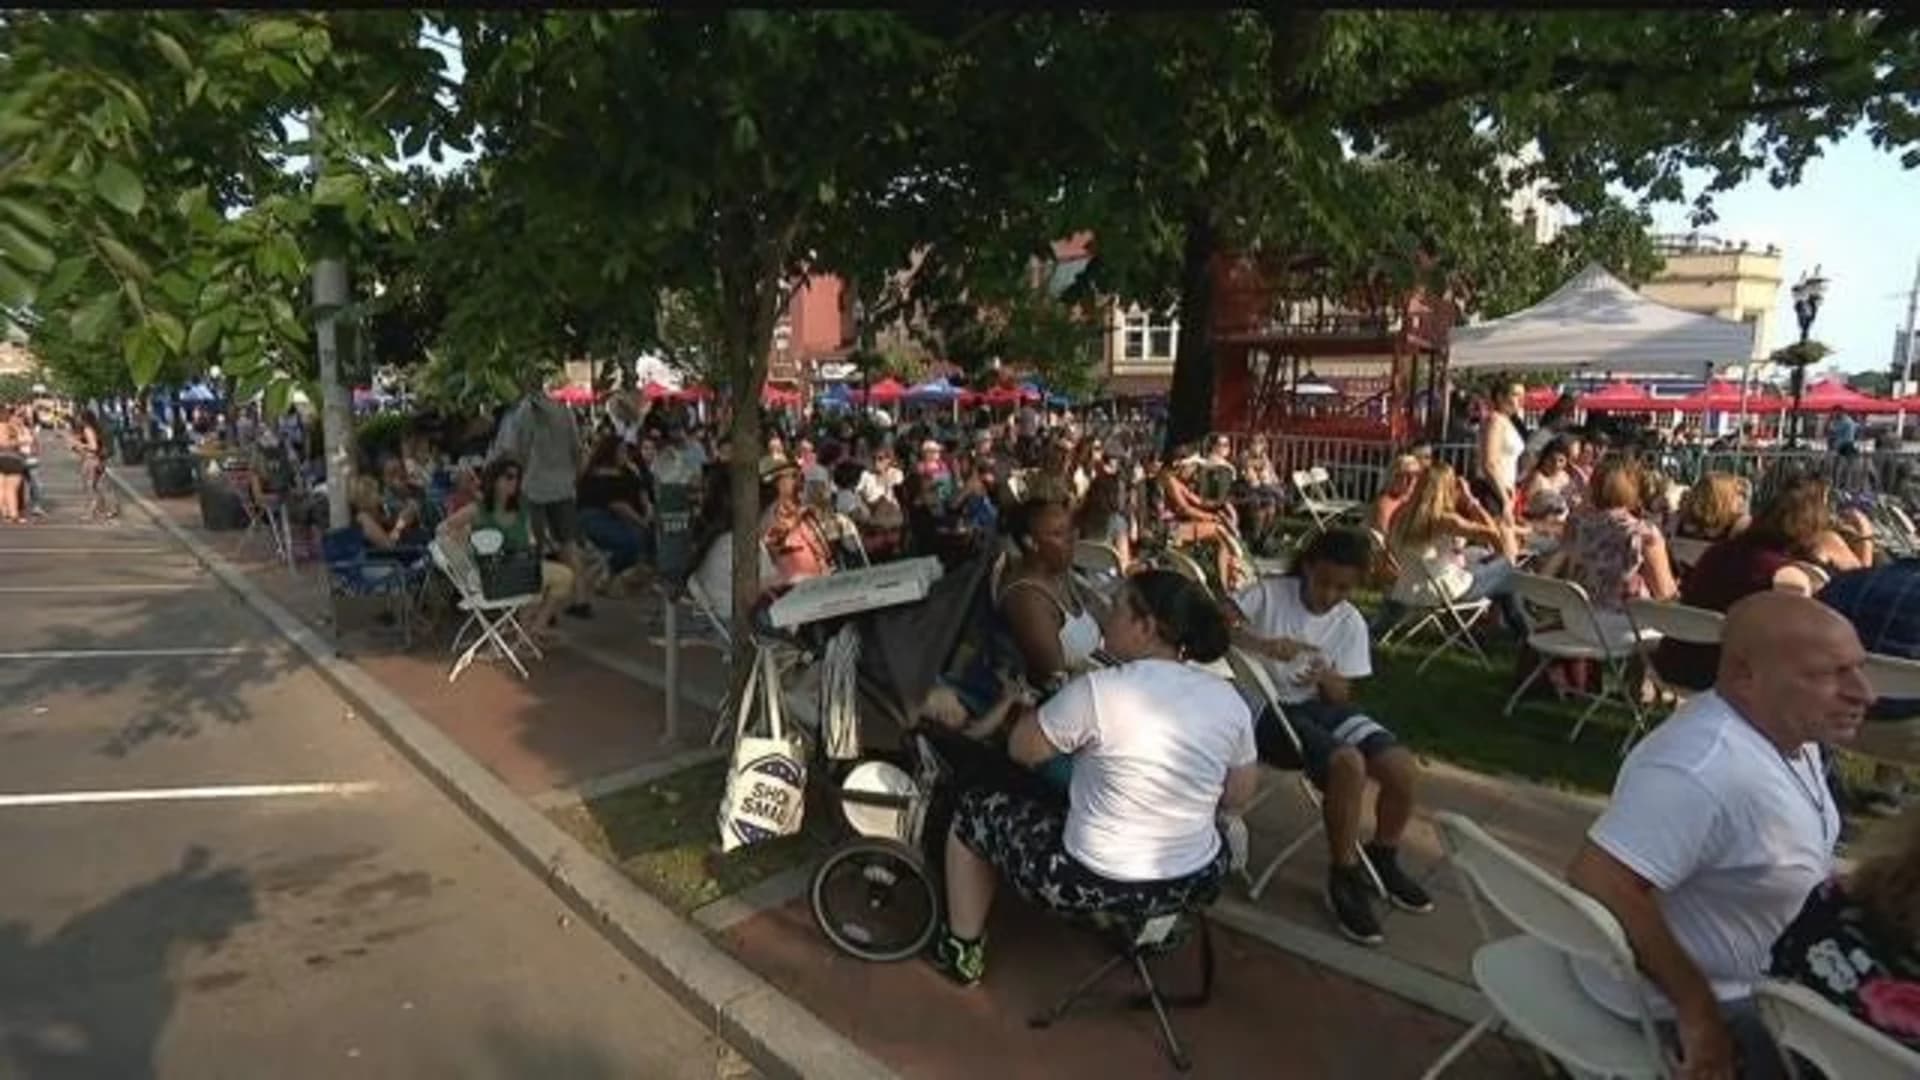 Summer of live music kicks off in Stamford